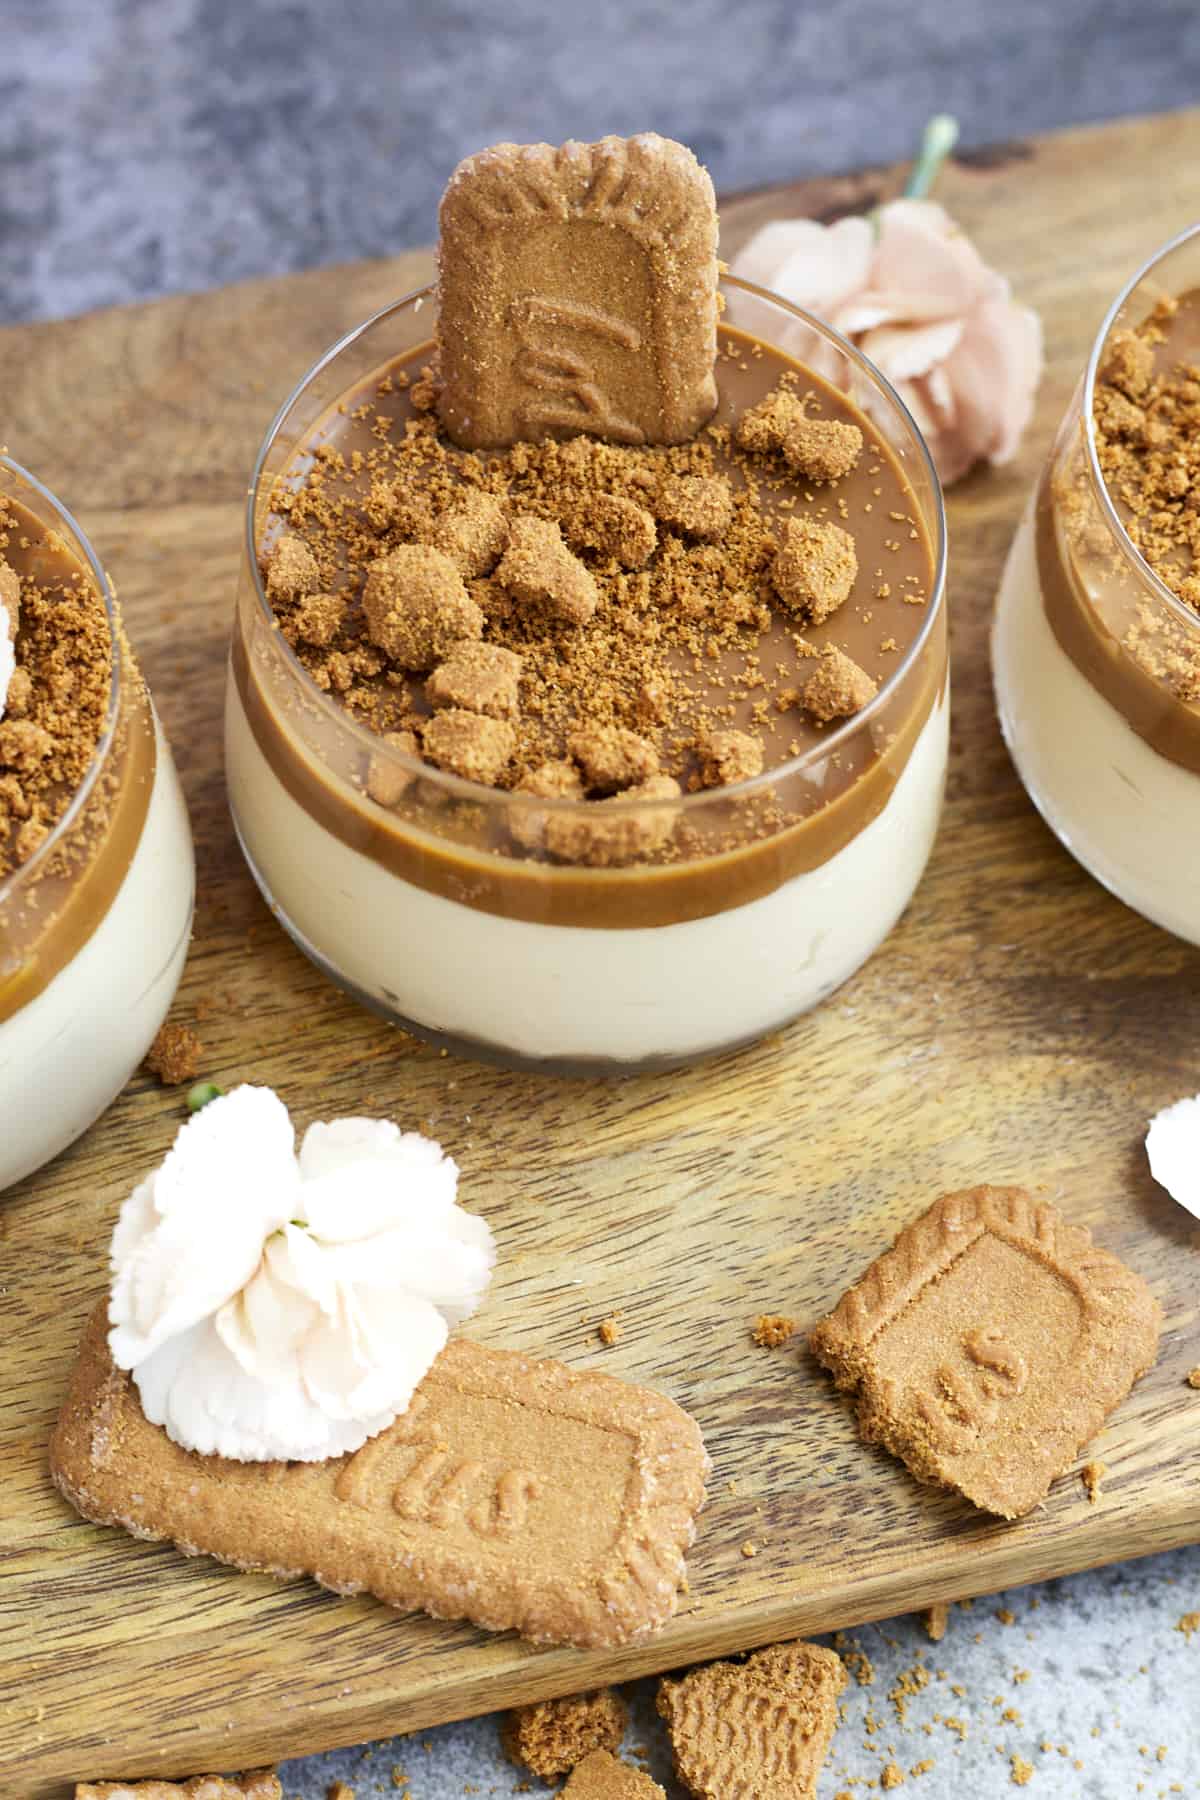 overehead image of jars of biscoff mousse topped with Biscoff spread and Biscoff cookies on a wooden board with Biscoff cookies scattered around